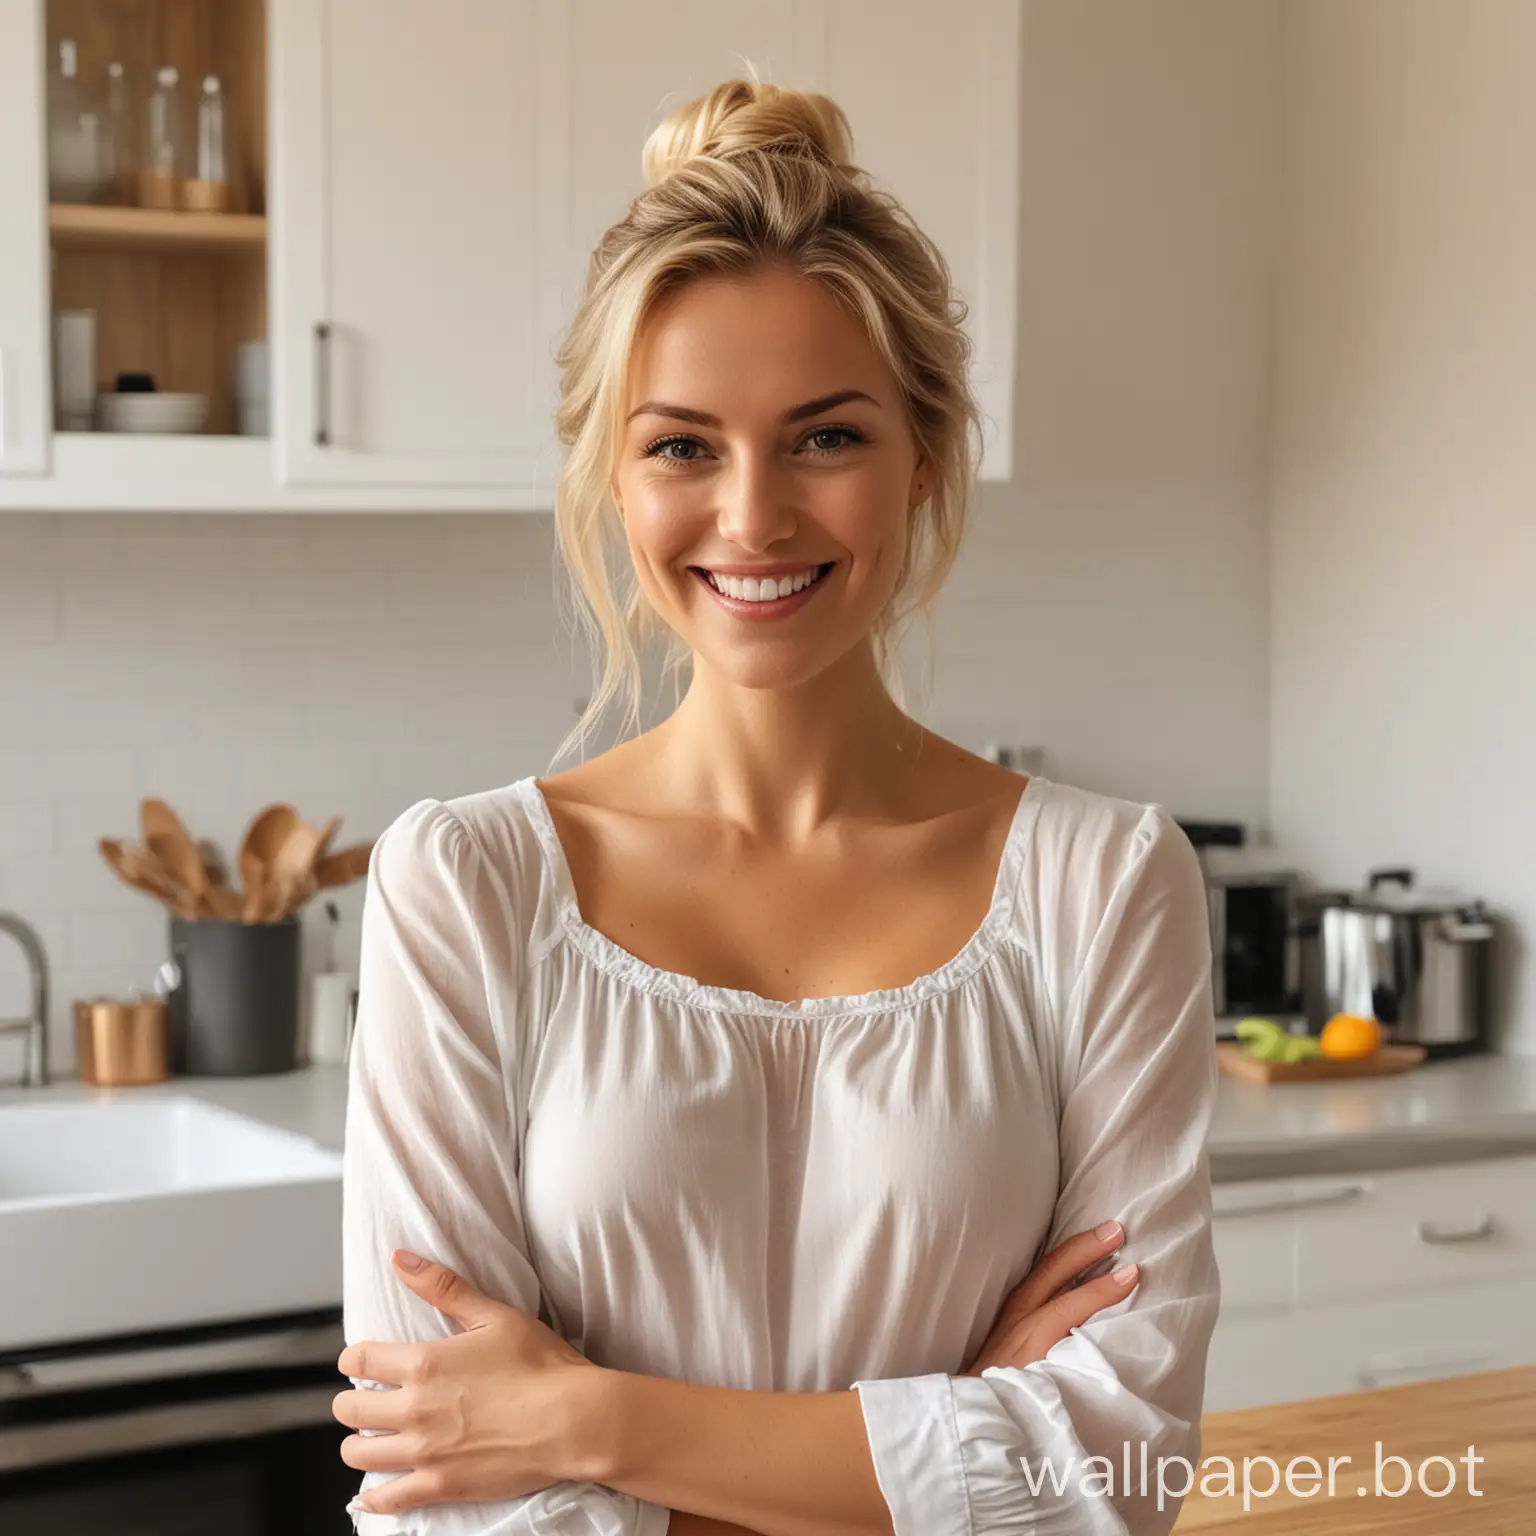 The Very same beautiful woman with blond hair and medium sized breasts wearing a plain white blouse smiling  with arms folded in a kitchen